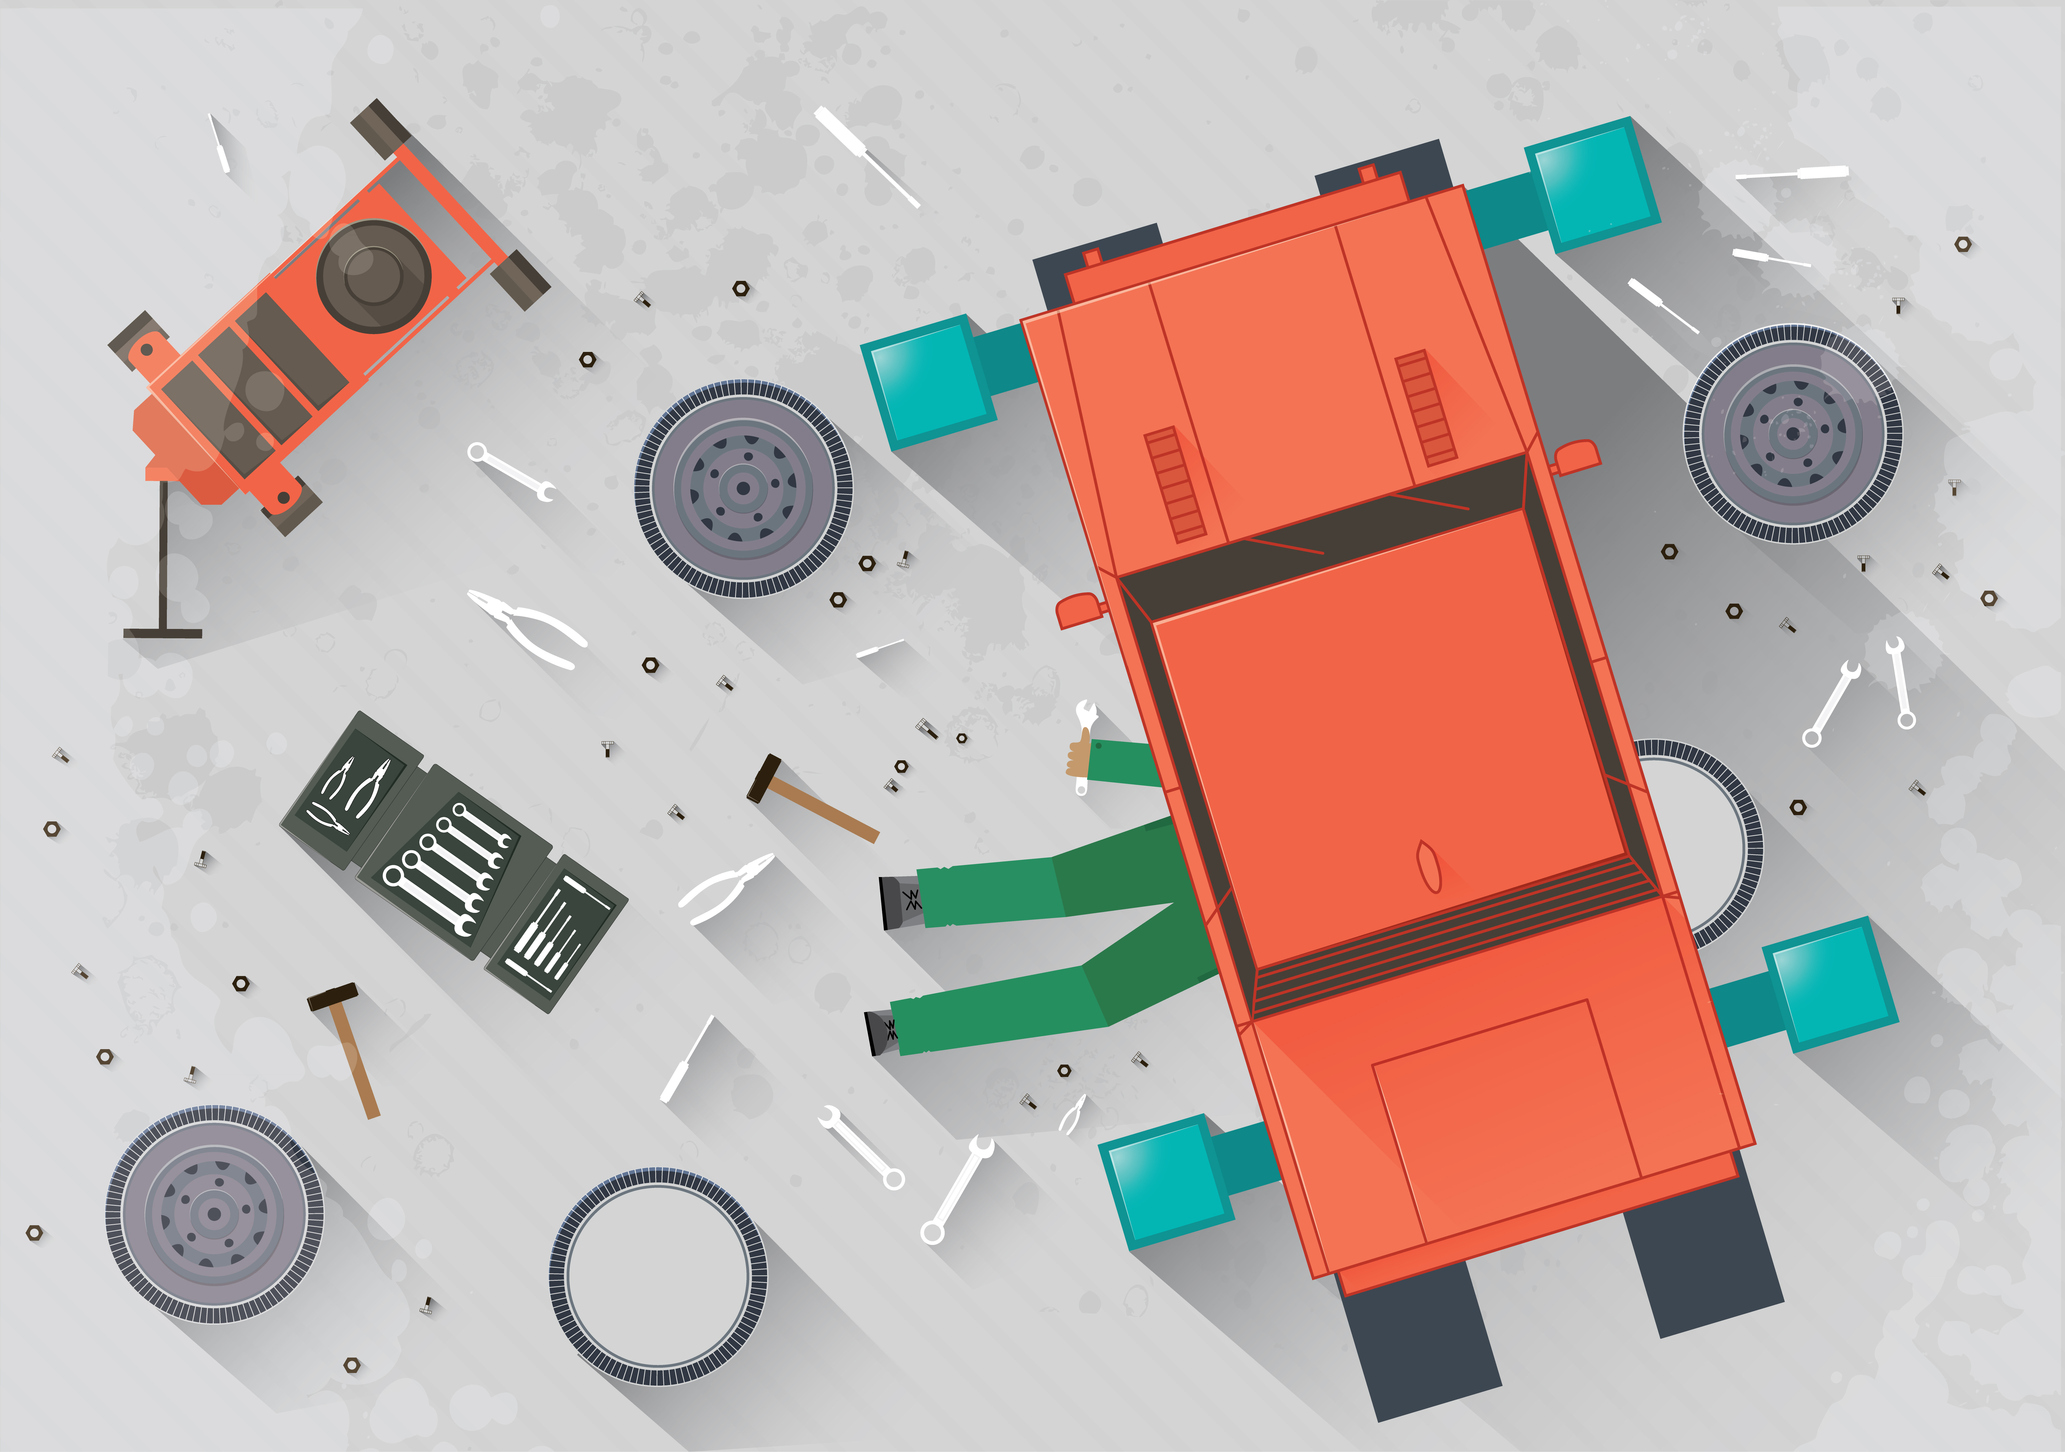 Mechanic repairing the car in the garage Vector illustration in flat style